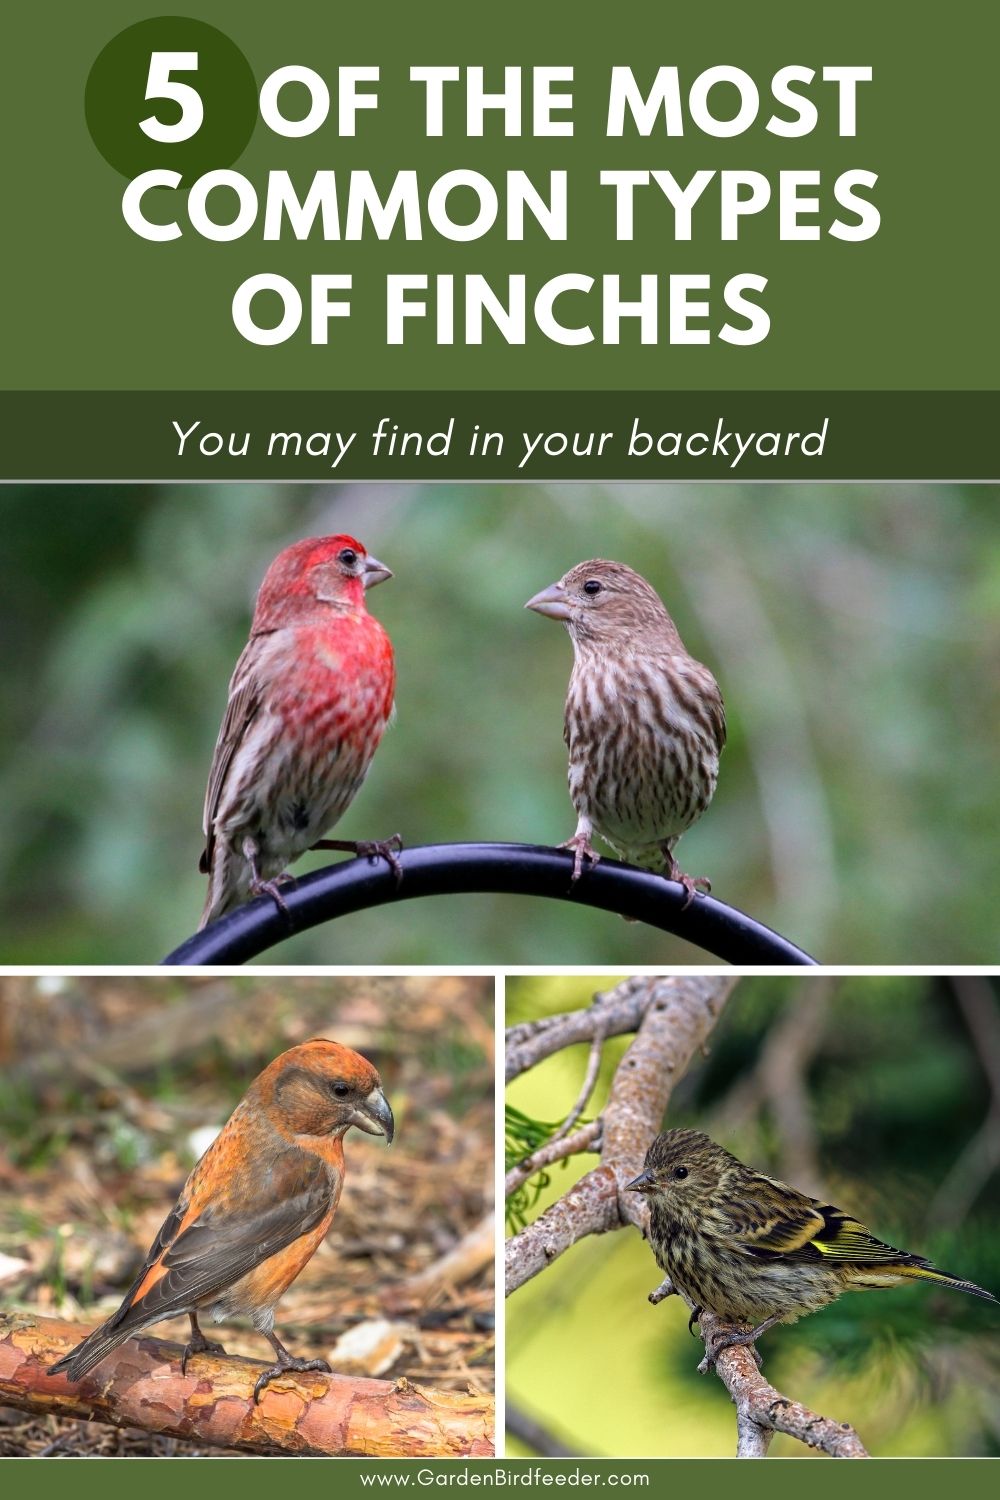 5 types of finches you may find in your backyard